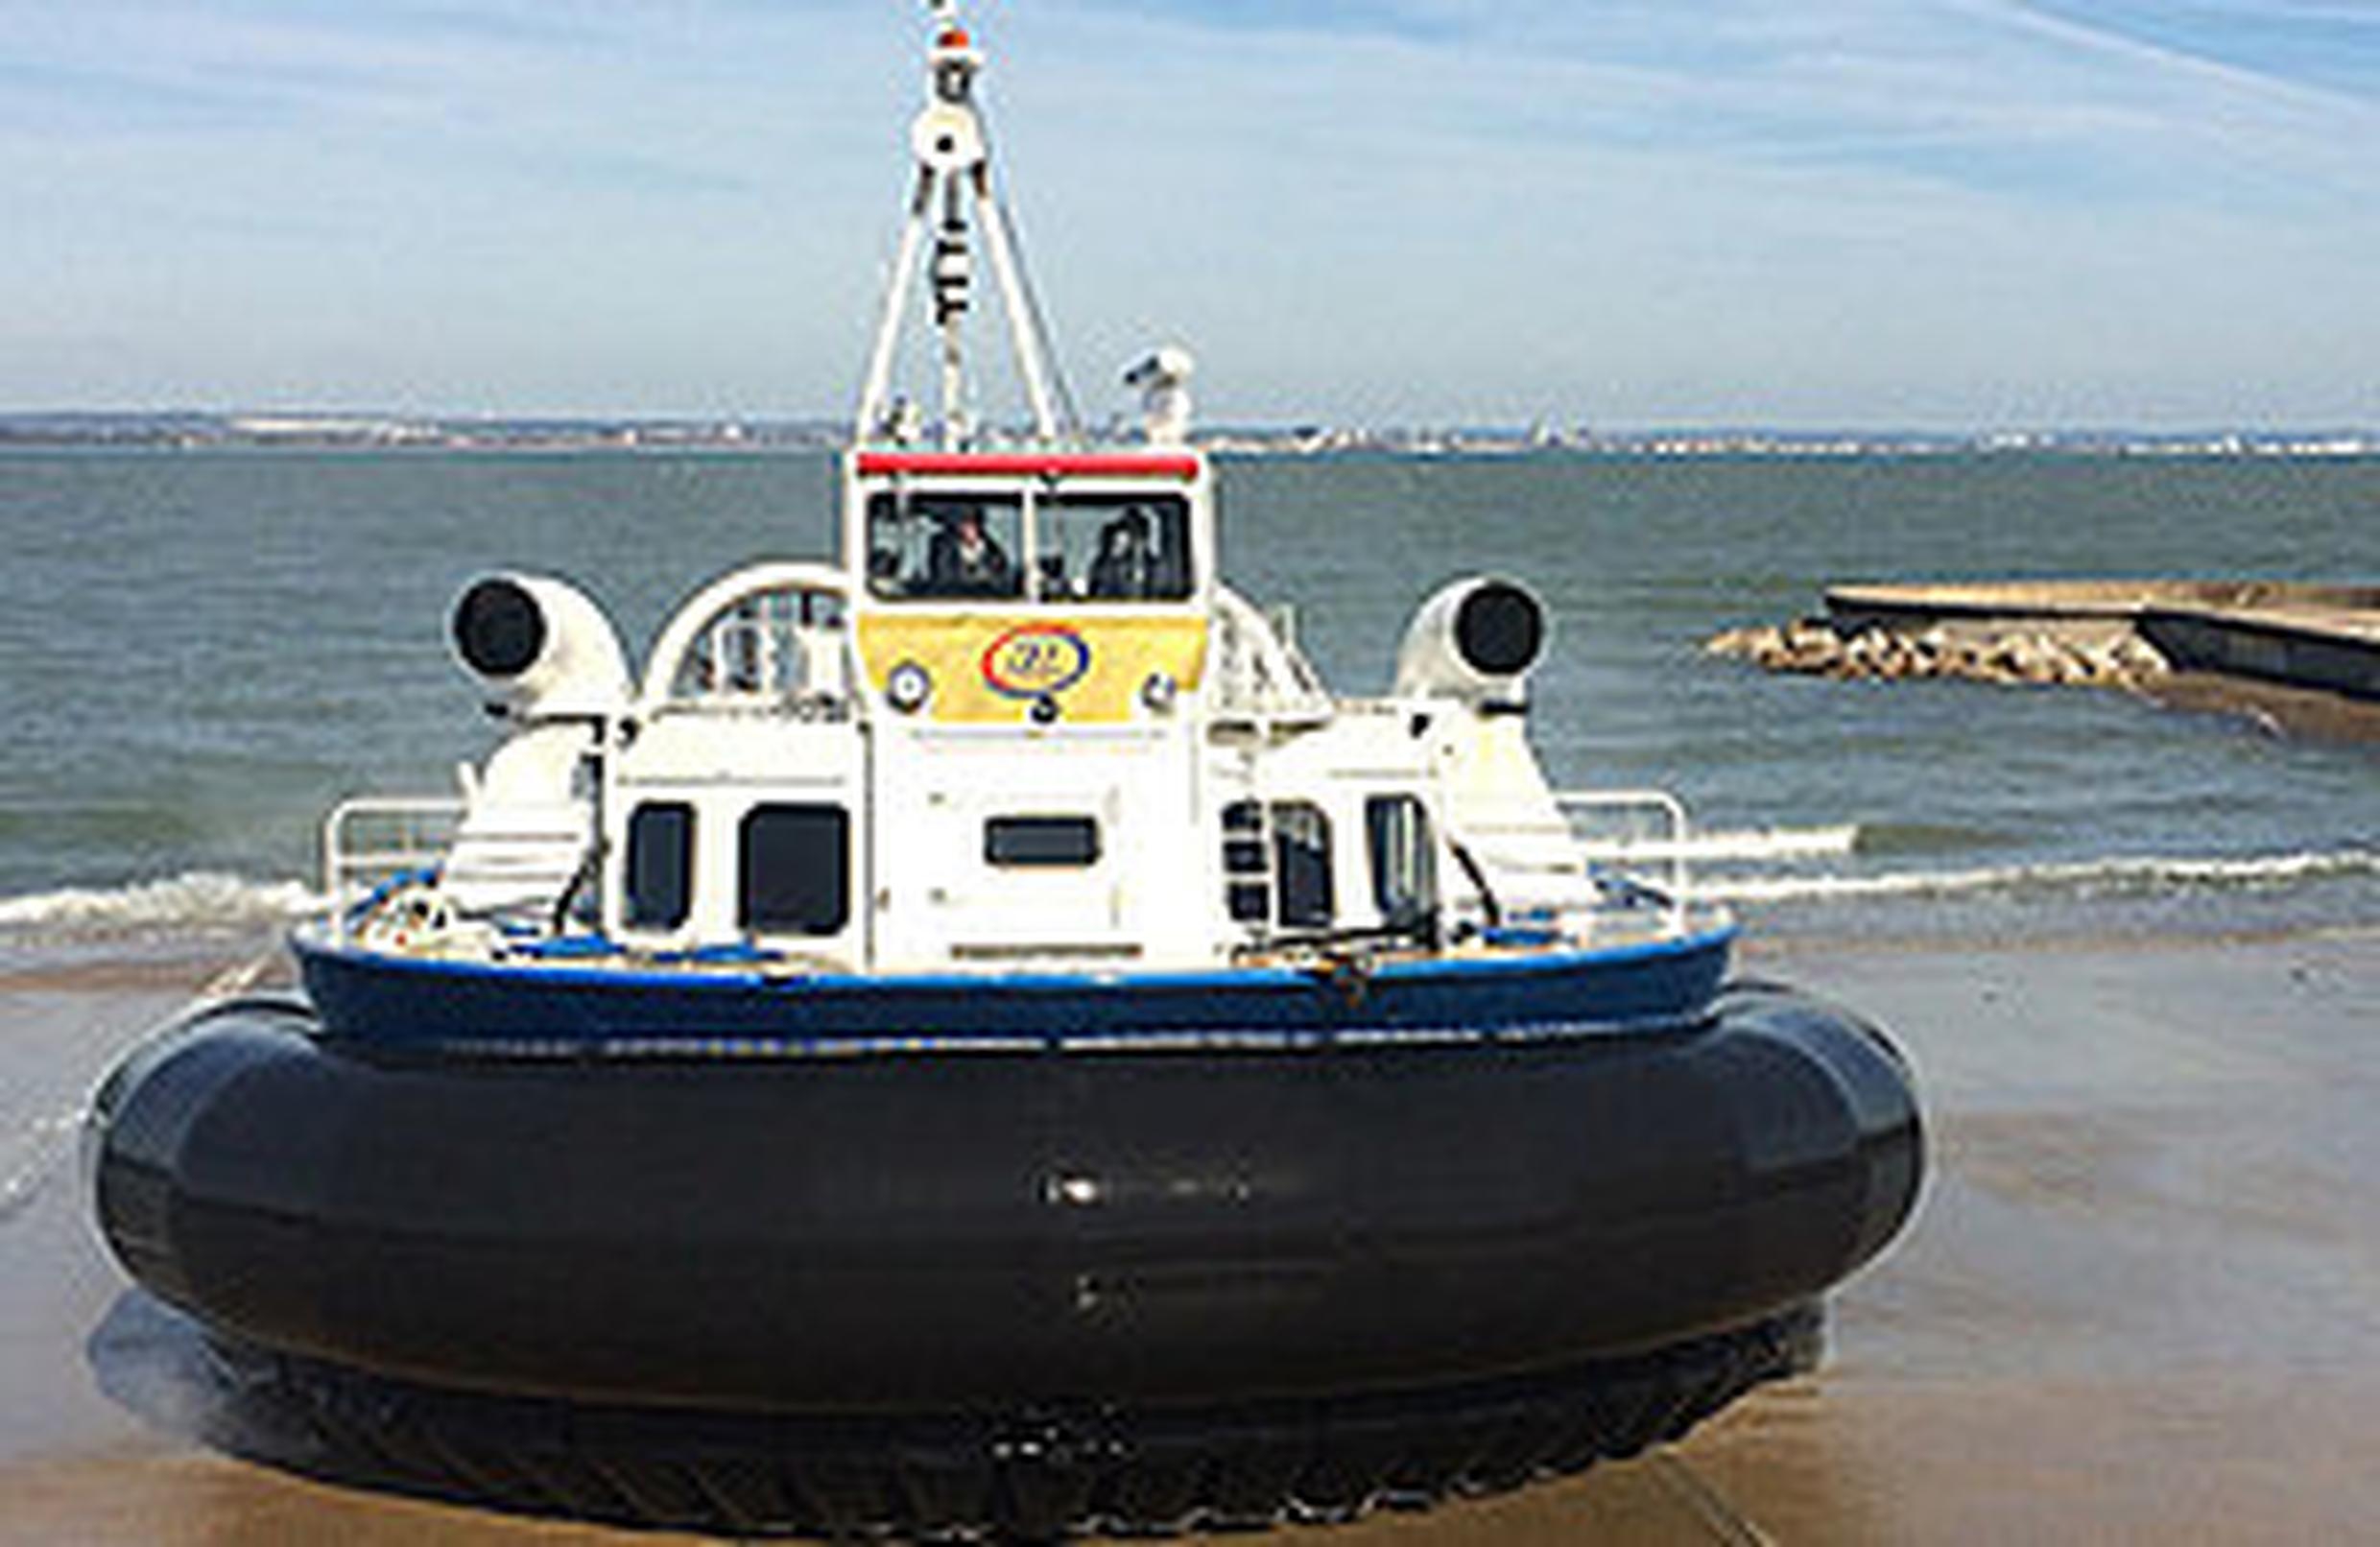 Ferry, hovercraft and air services to and from the Isle of Wight and Isles of Scilly will be supported